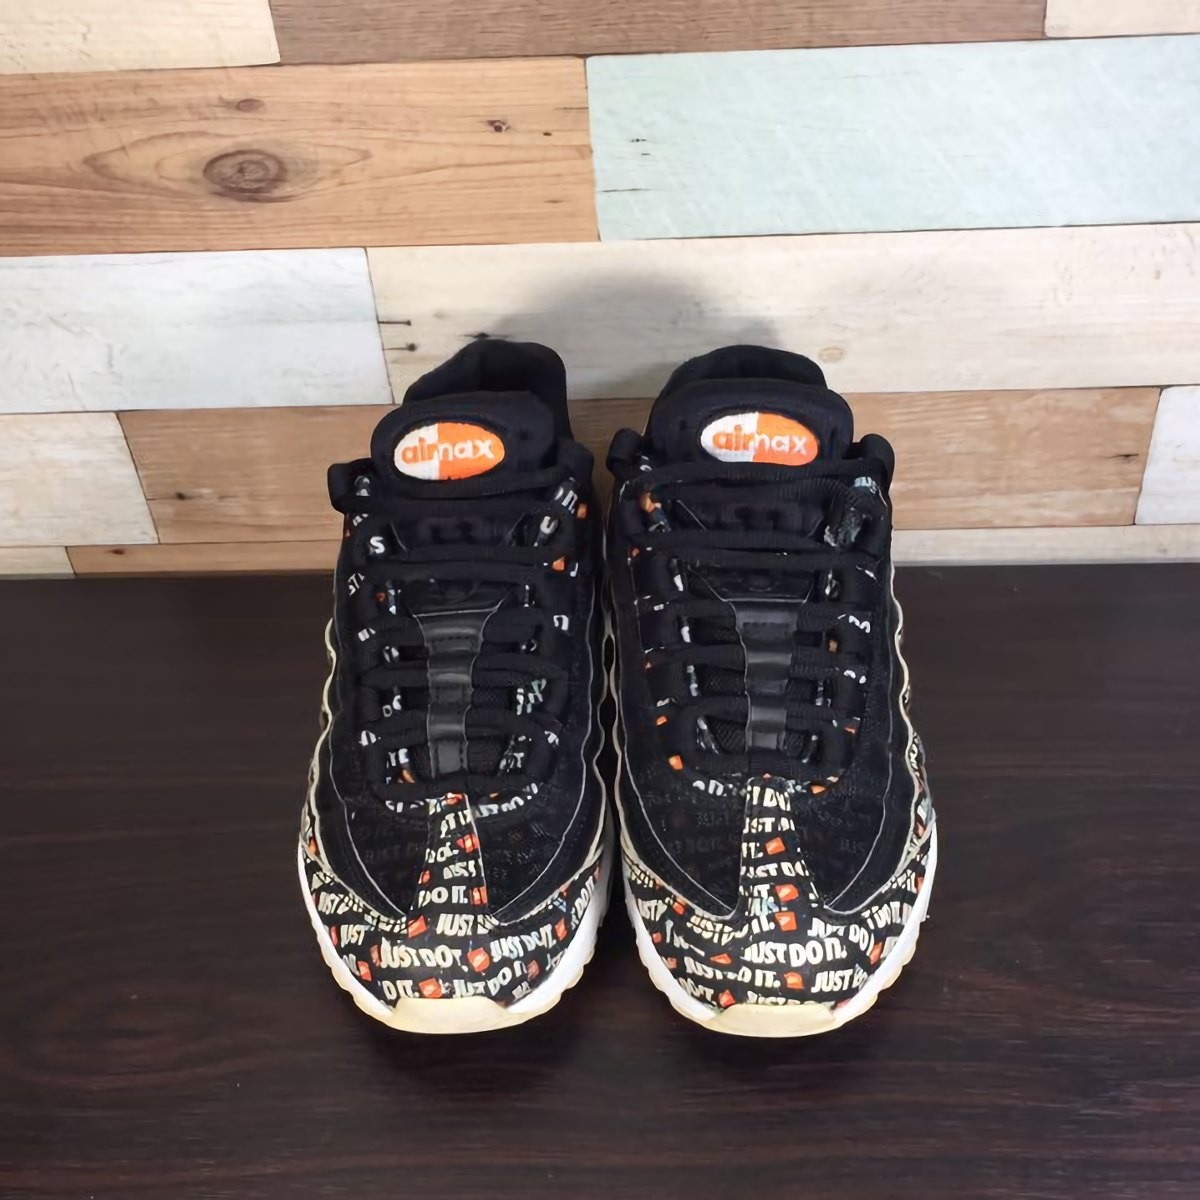 NIKE AIR MAX 95 SE JUST DO IT ナイキエアマックス95 SE JUST DO IT